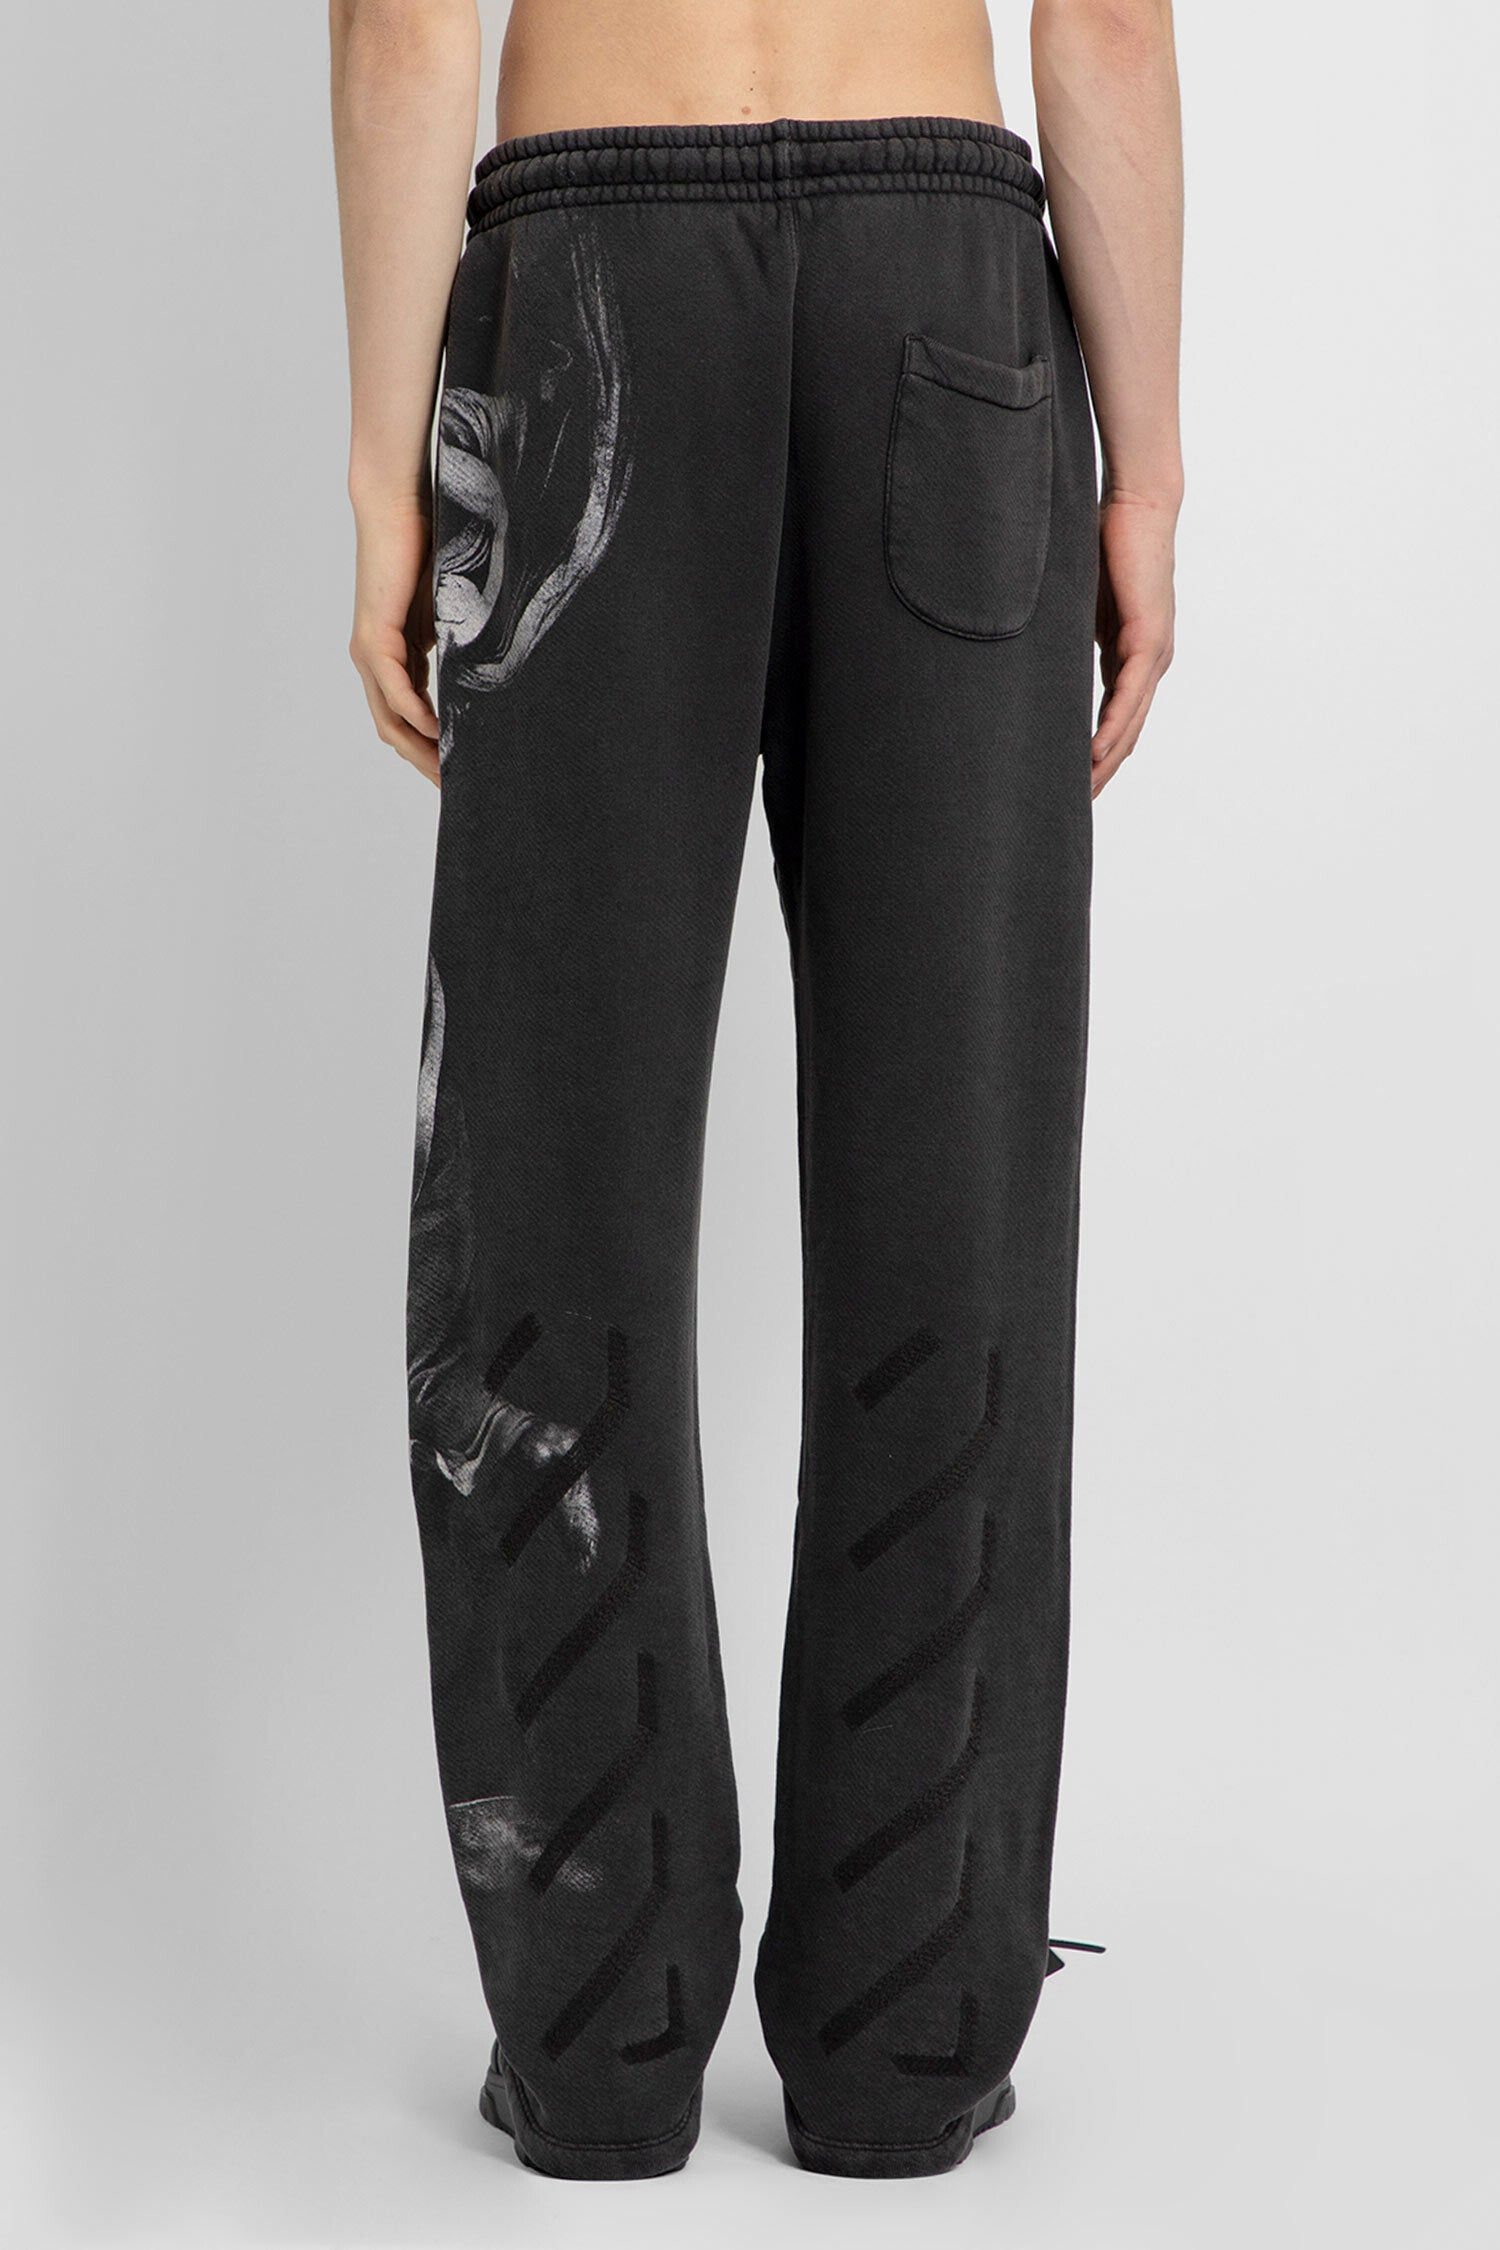 OFF-WHITE MAN GREY TROUSERS